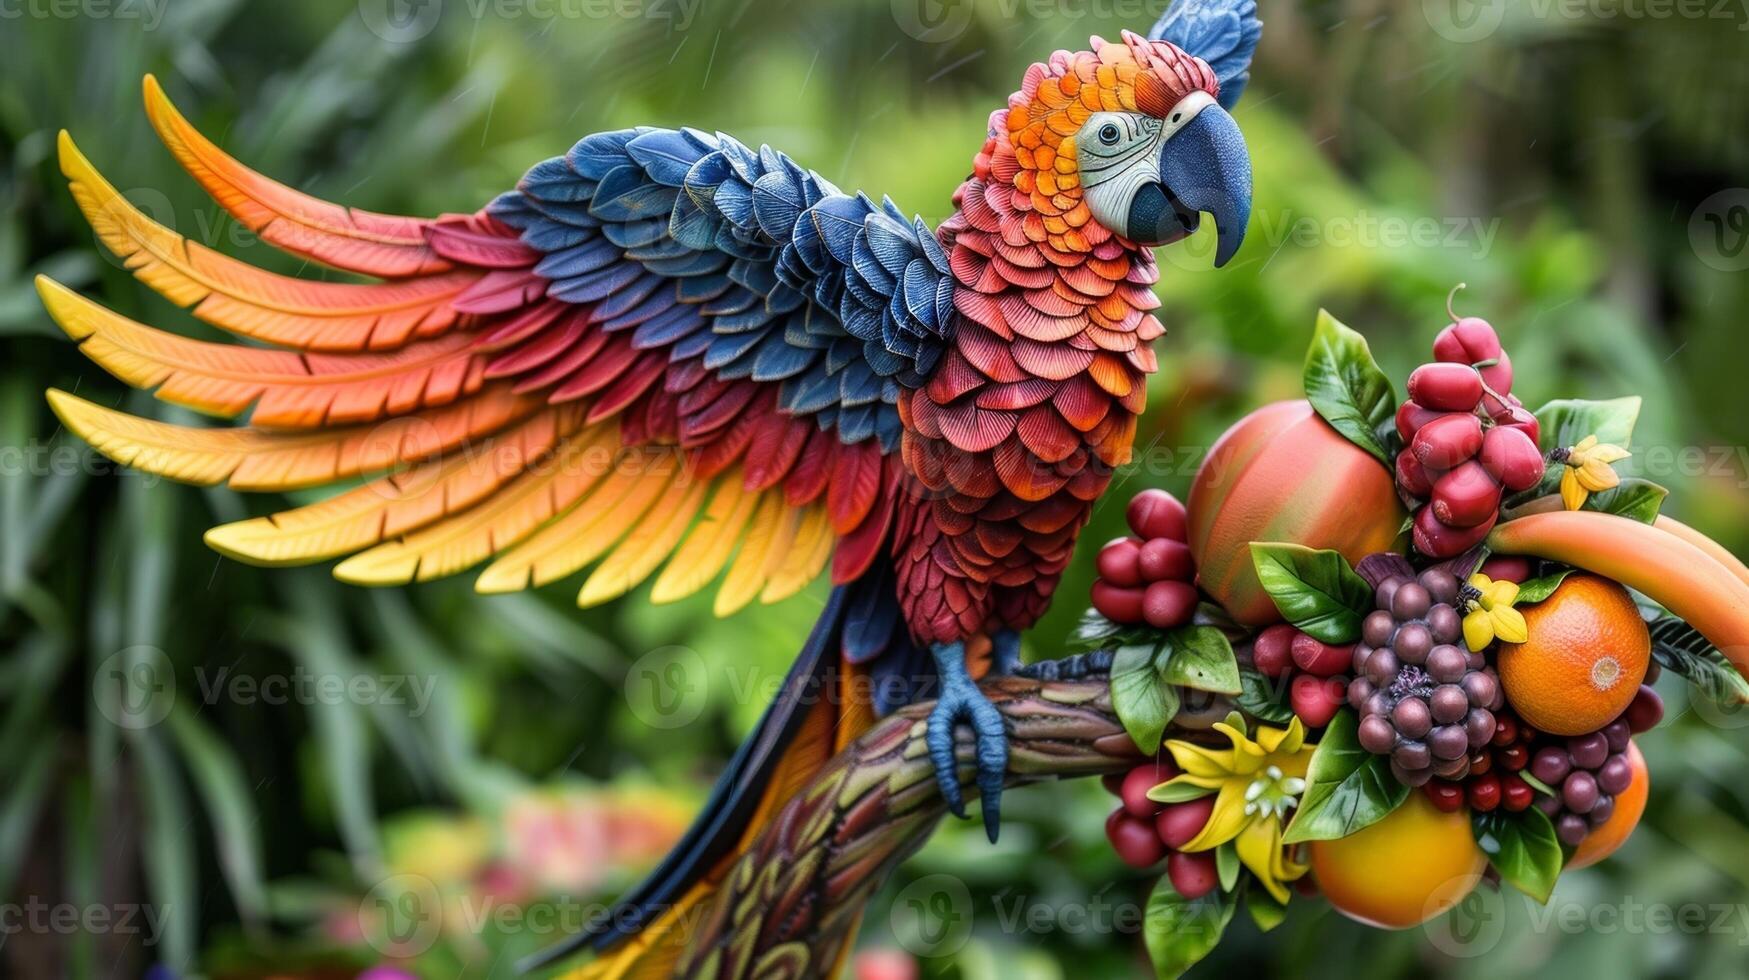 A colorful parrot sculpted from a mix of tropical fruits with its wings spread in flight photo